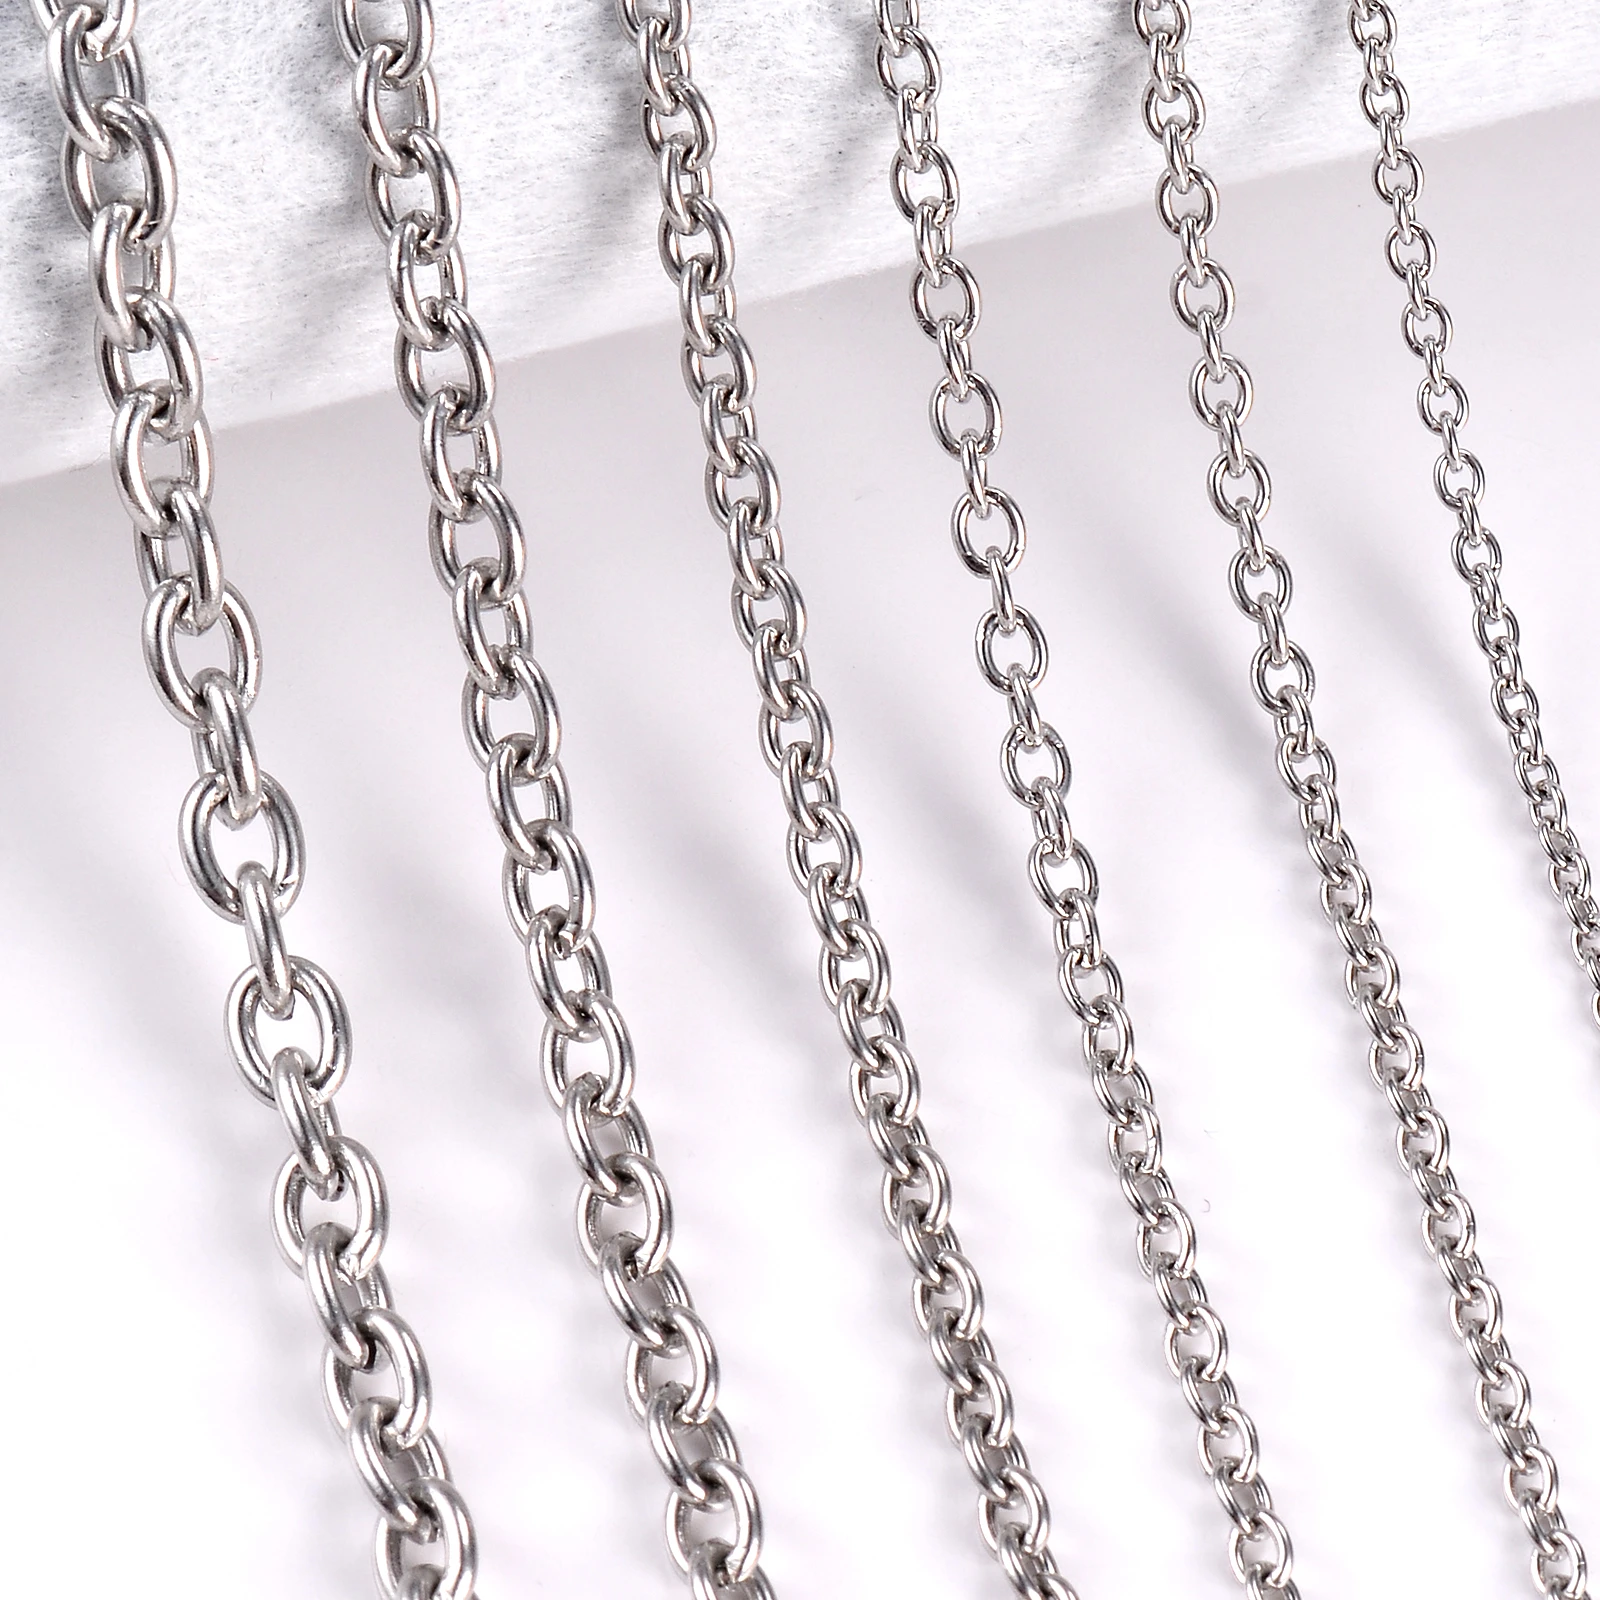 1Pc Width 1.5mm-6mm Stainless Steel Cross O Chain Necklace For Women Men DIY Jewelry Thin Bracelet Necklace